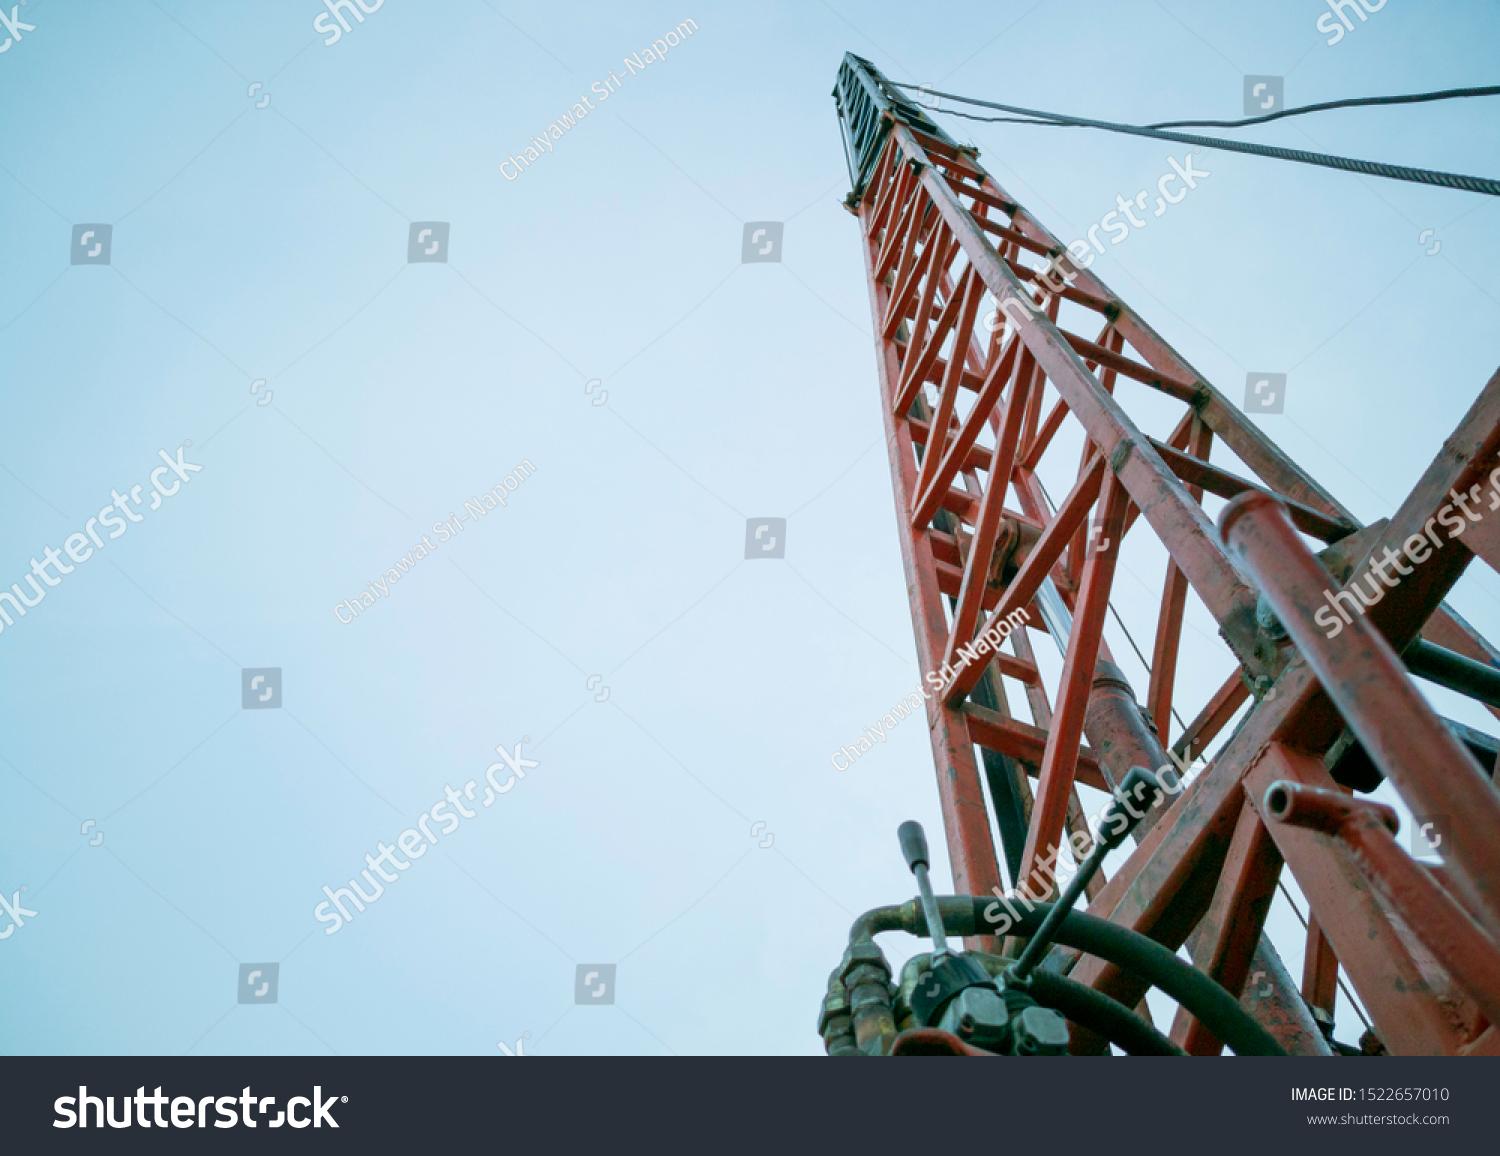 height drop and penatration of pile, pile driving in construction site, piling on blue sky background #1522657010